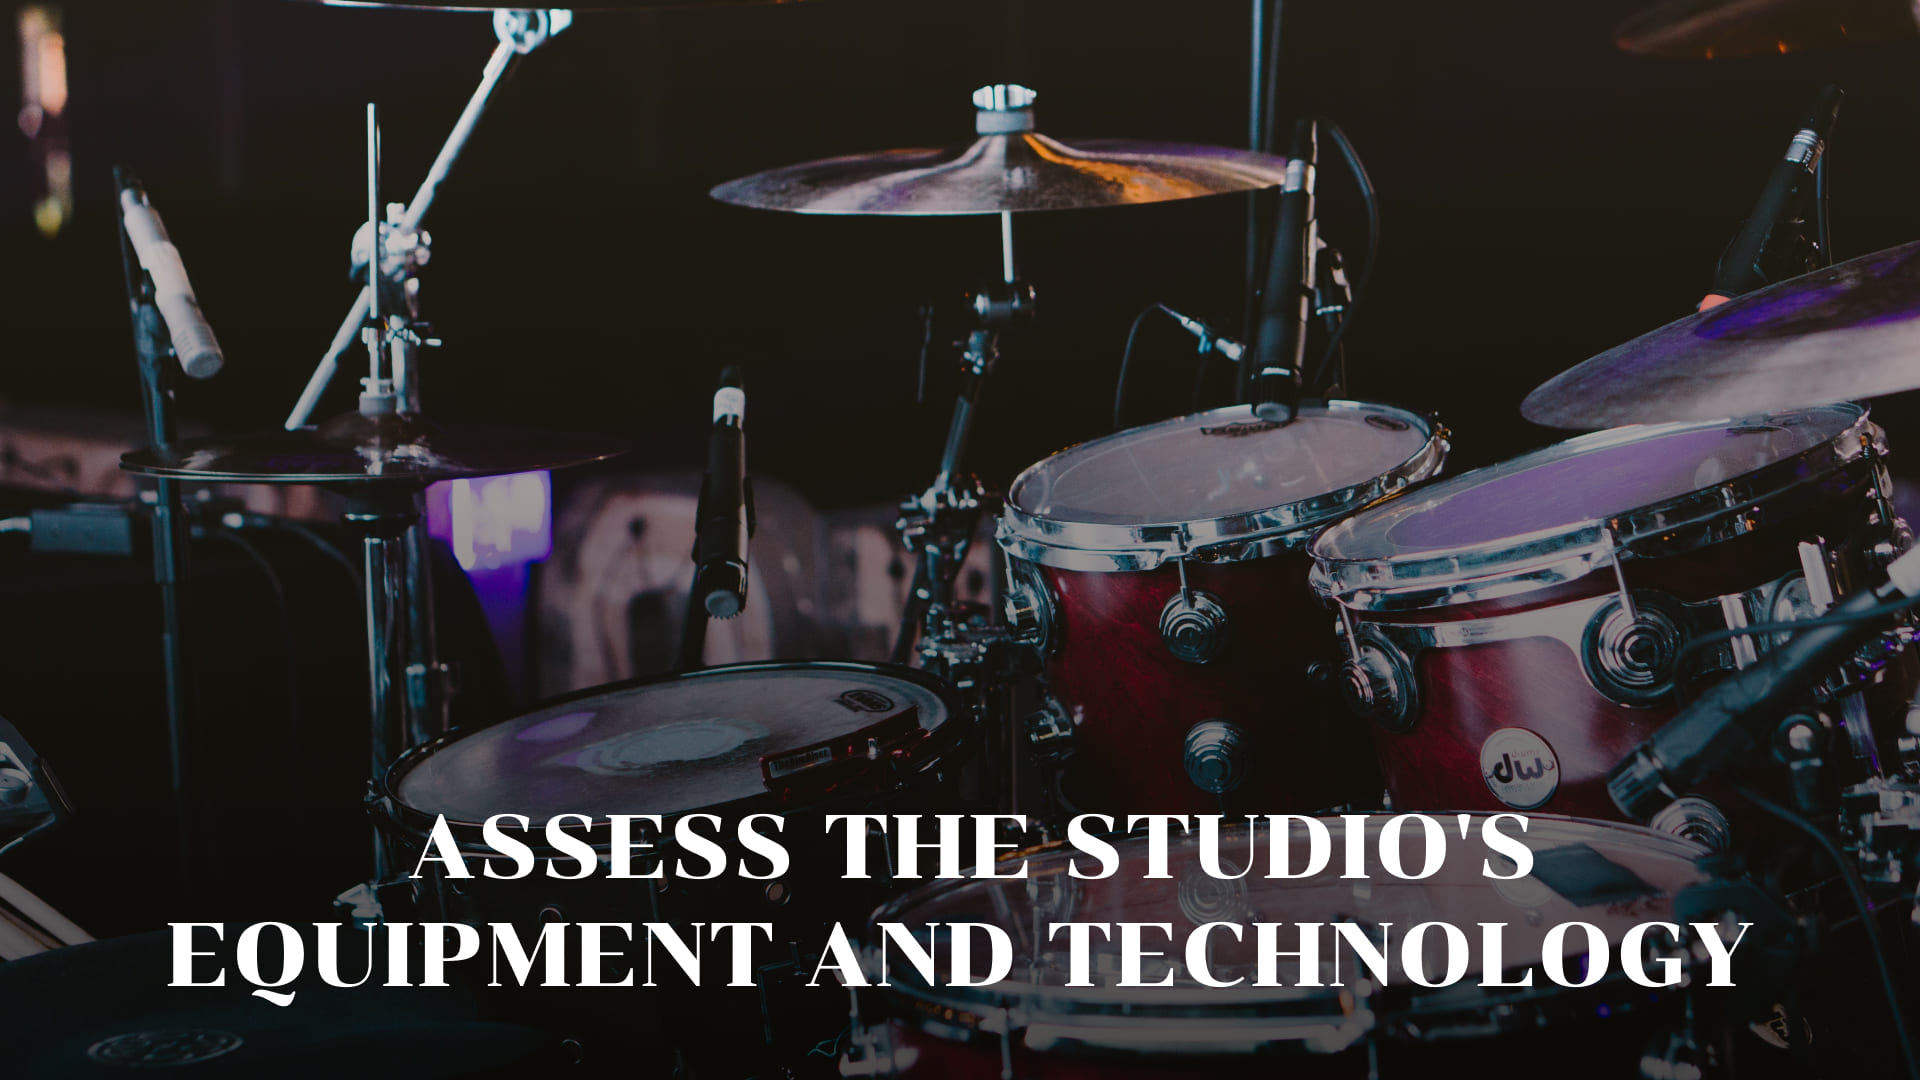 Assess the Studio's Equipment and Technology